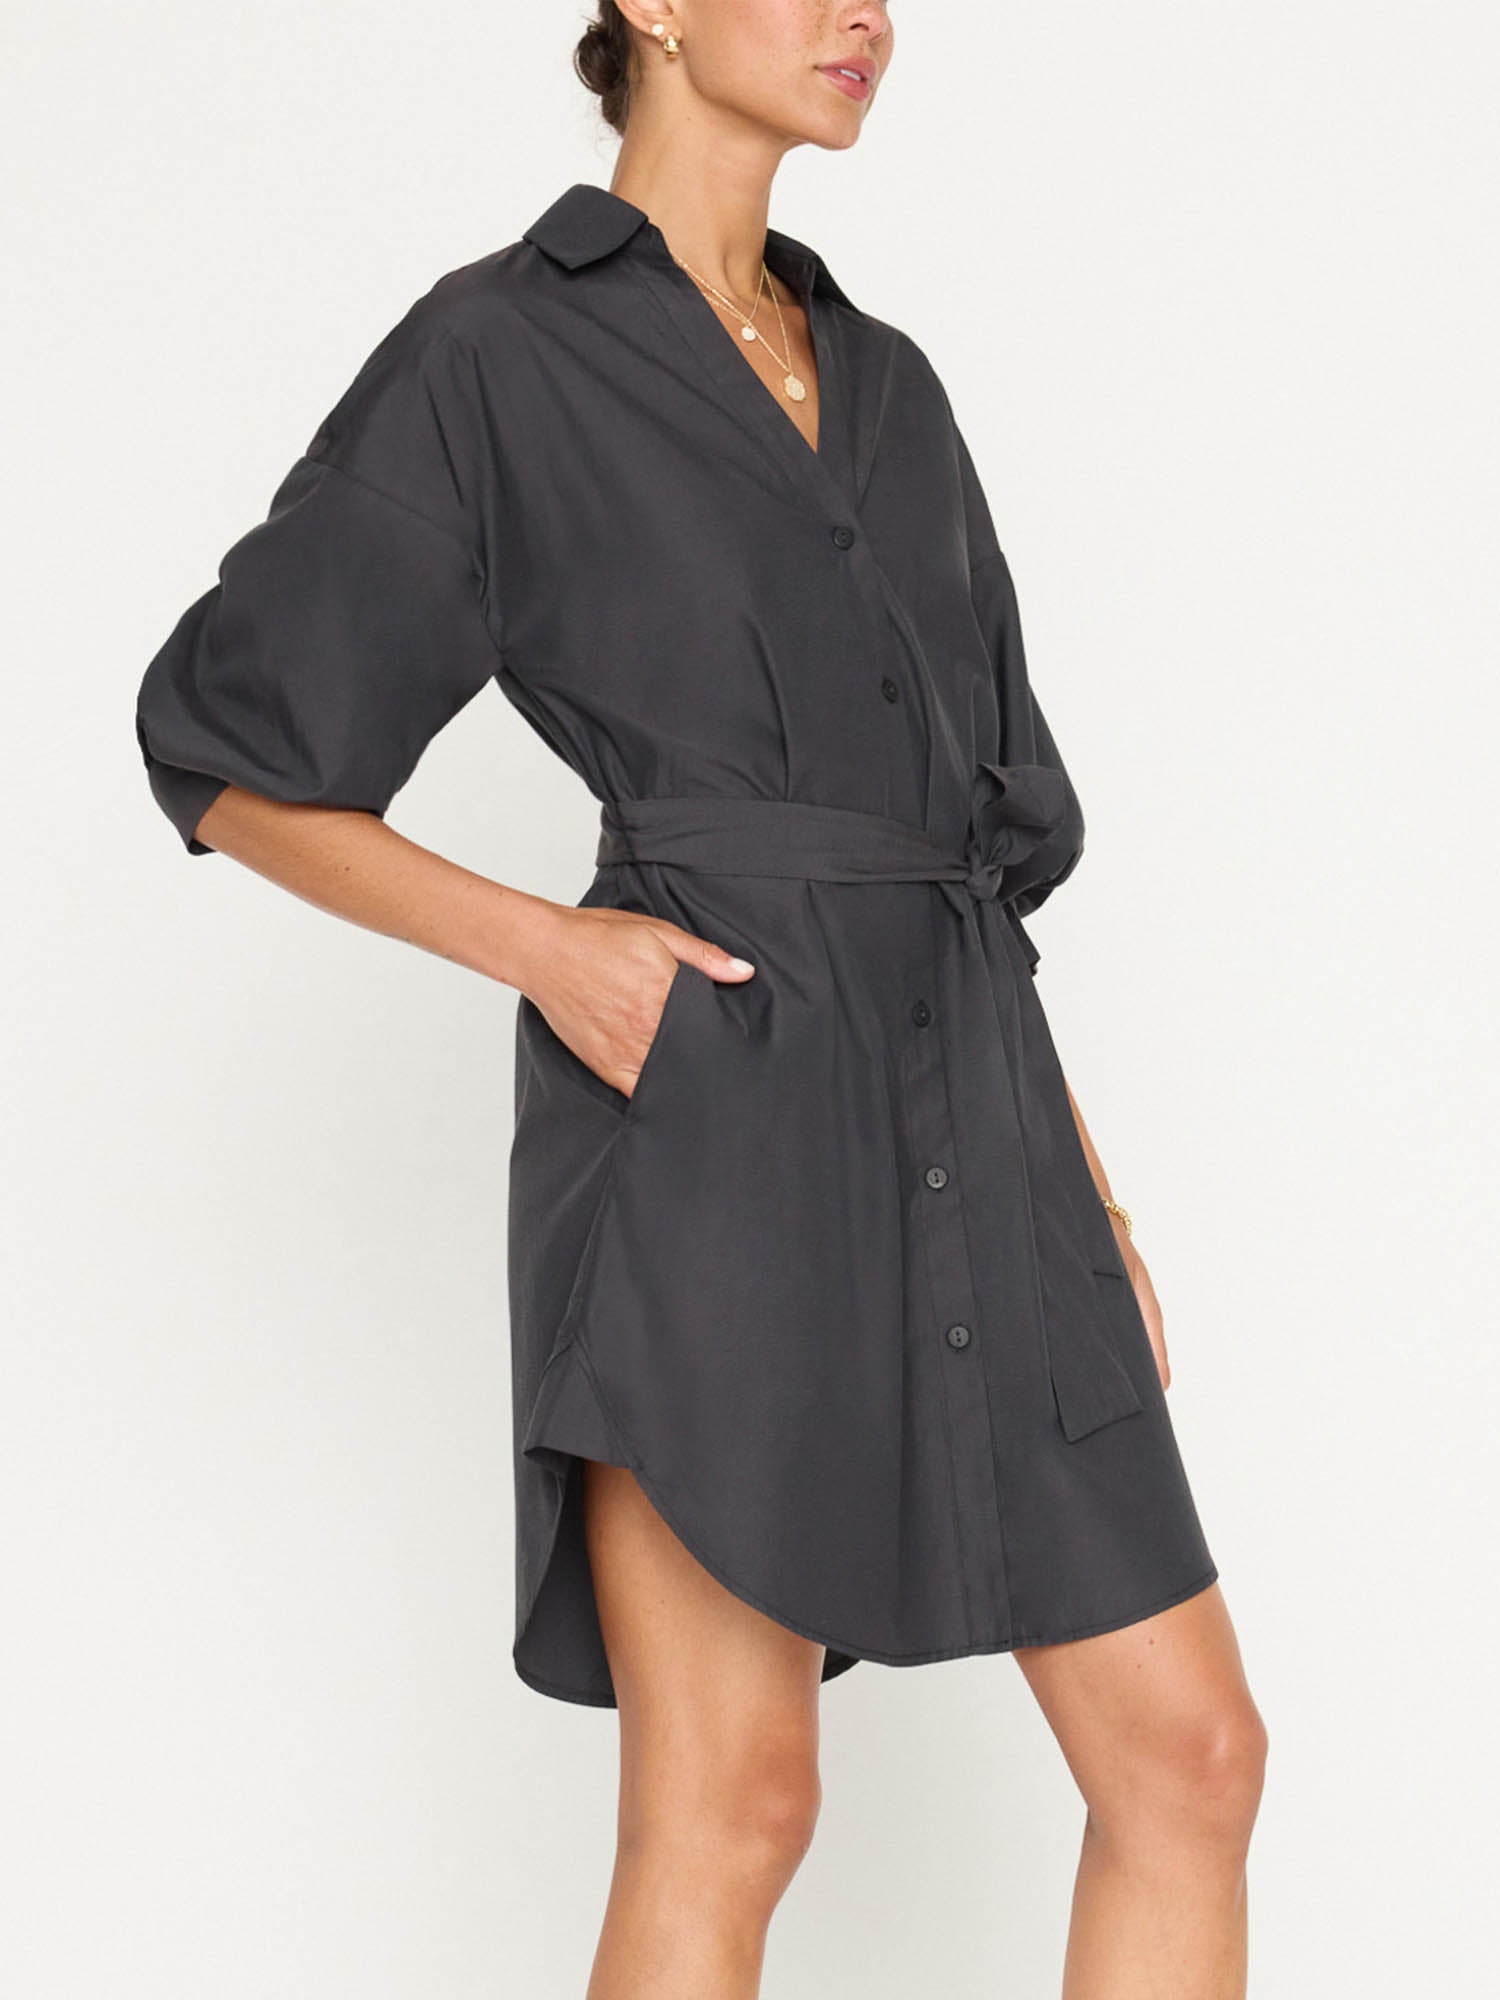 Kate belted button up mini dress black side view